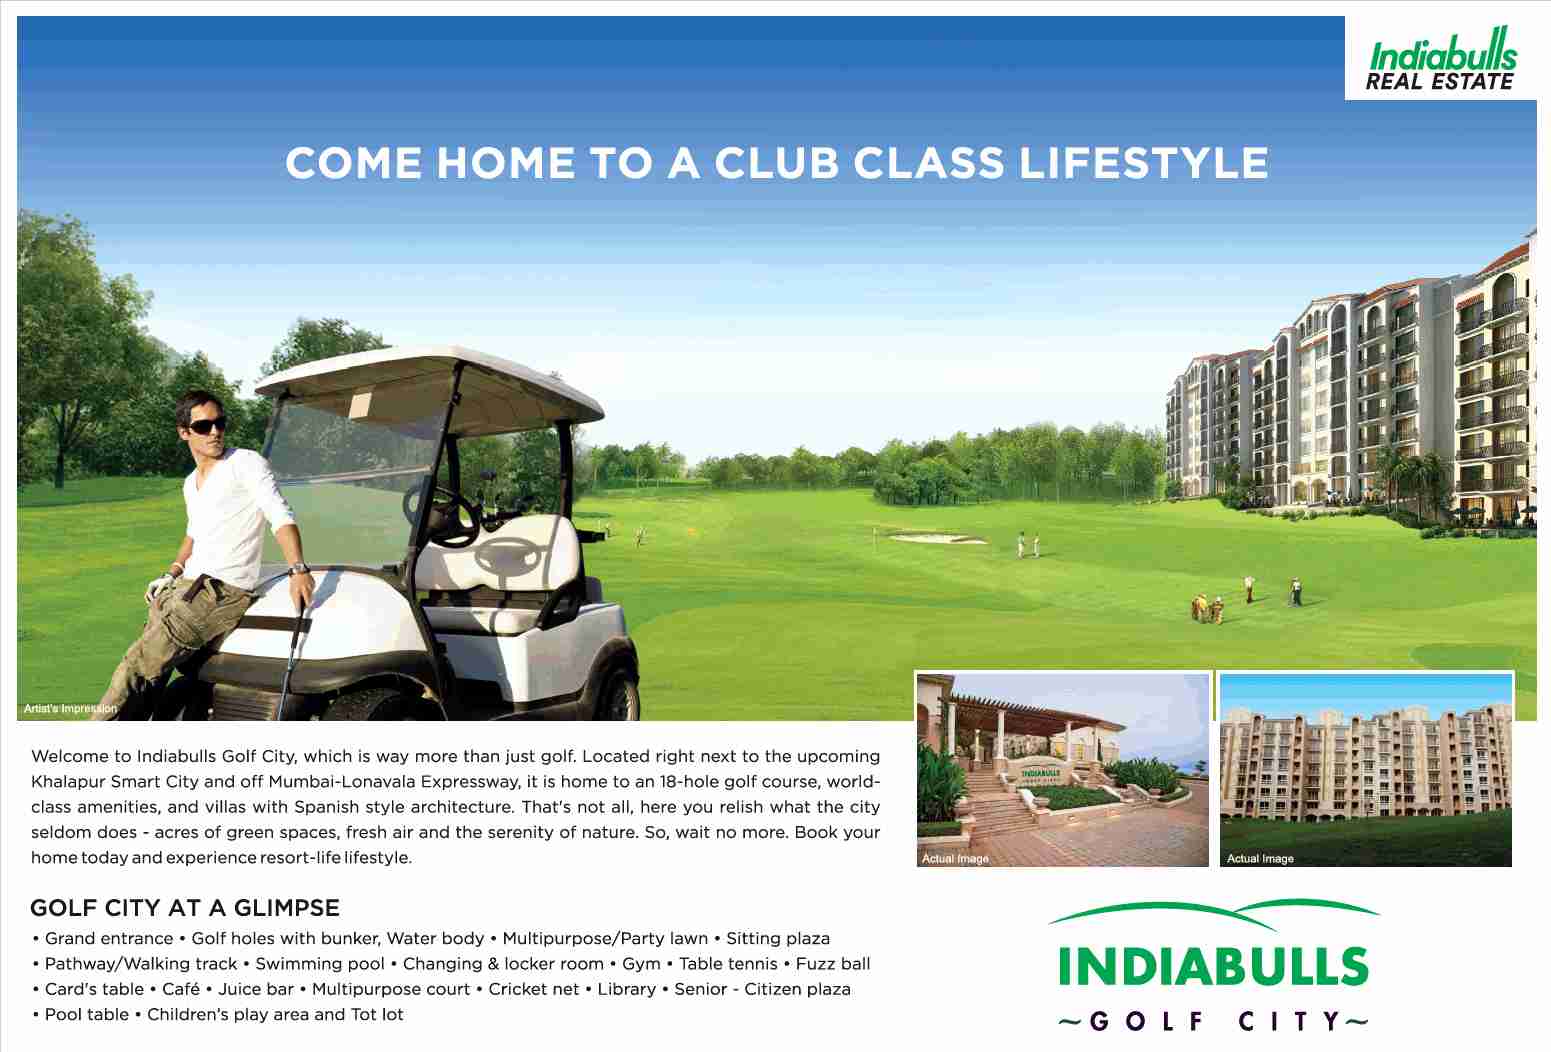 Experience a club class lifestyle by residing at Indiabulls Golf City in Navi Mumbai Update